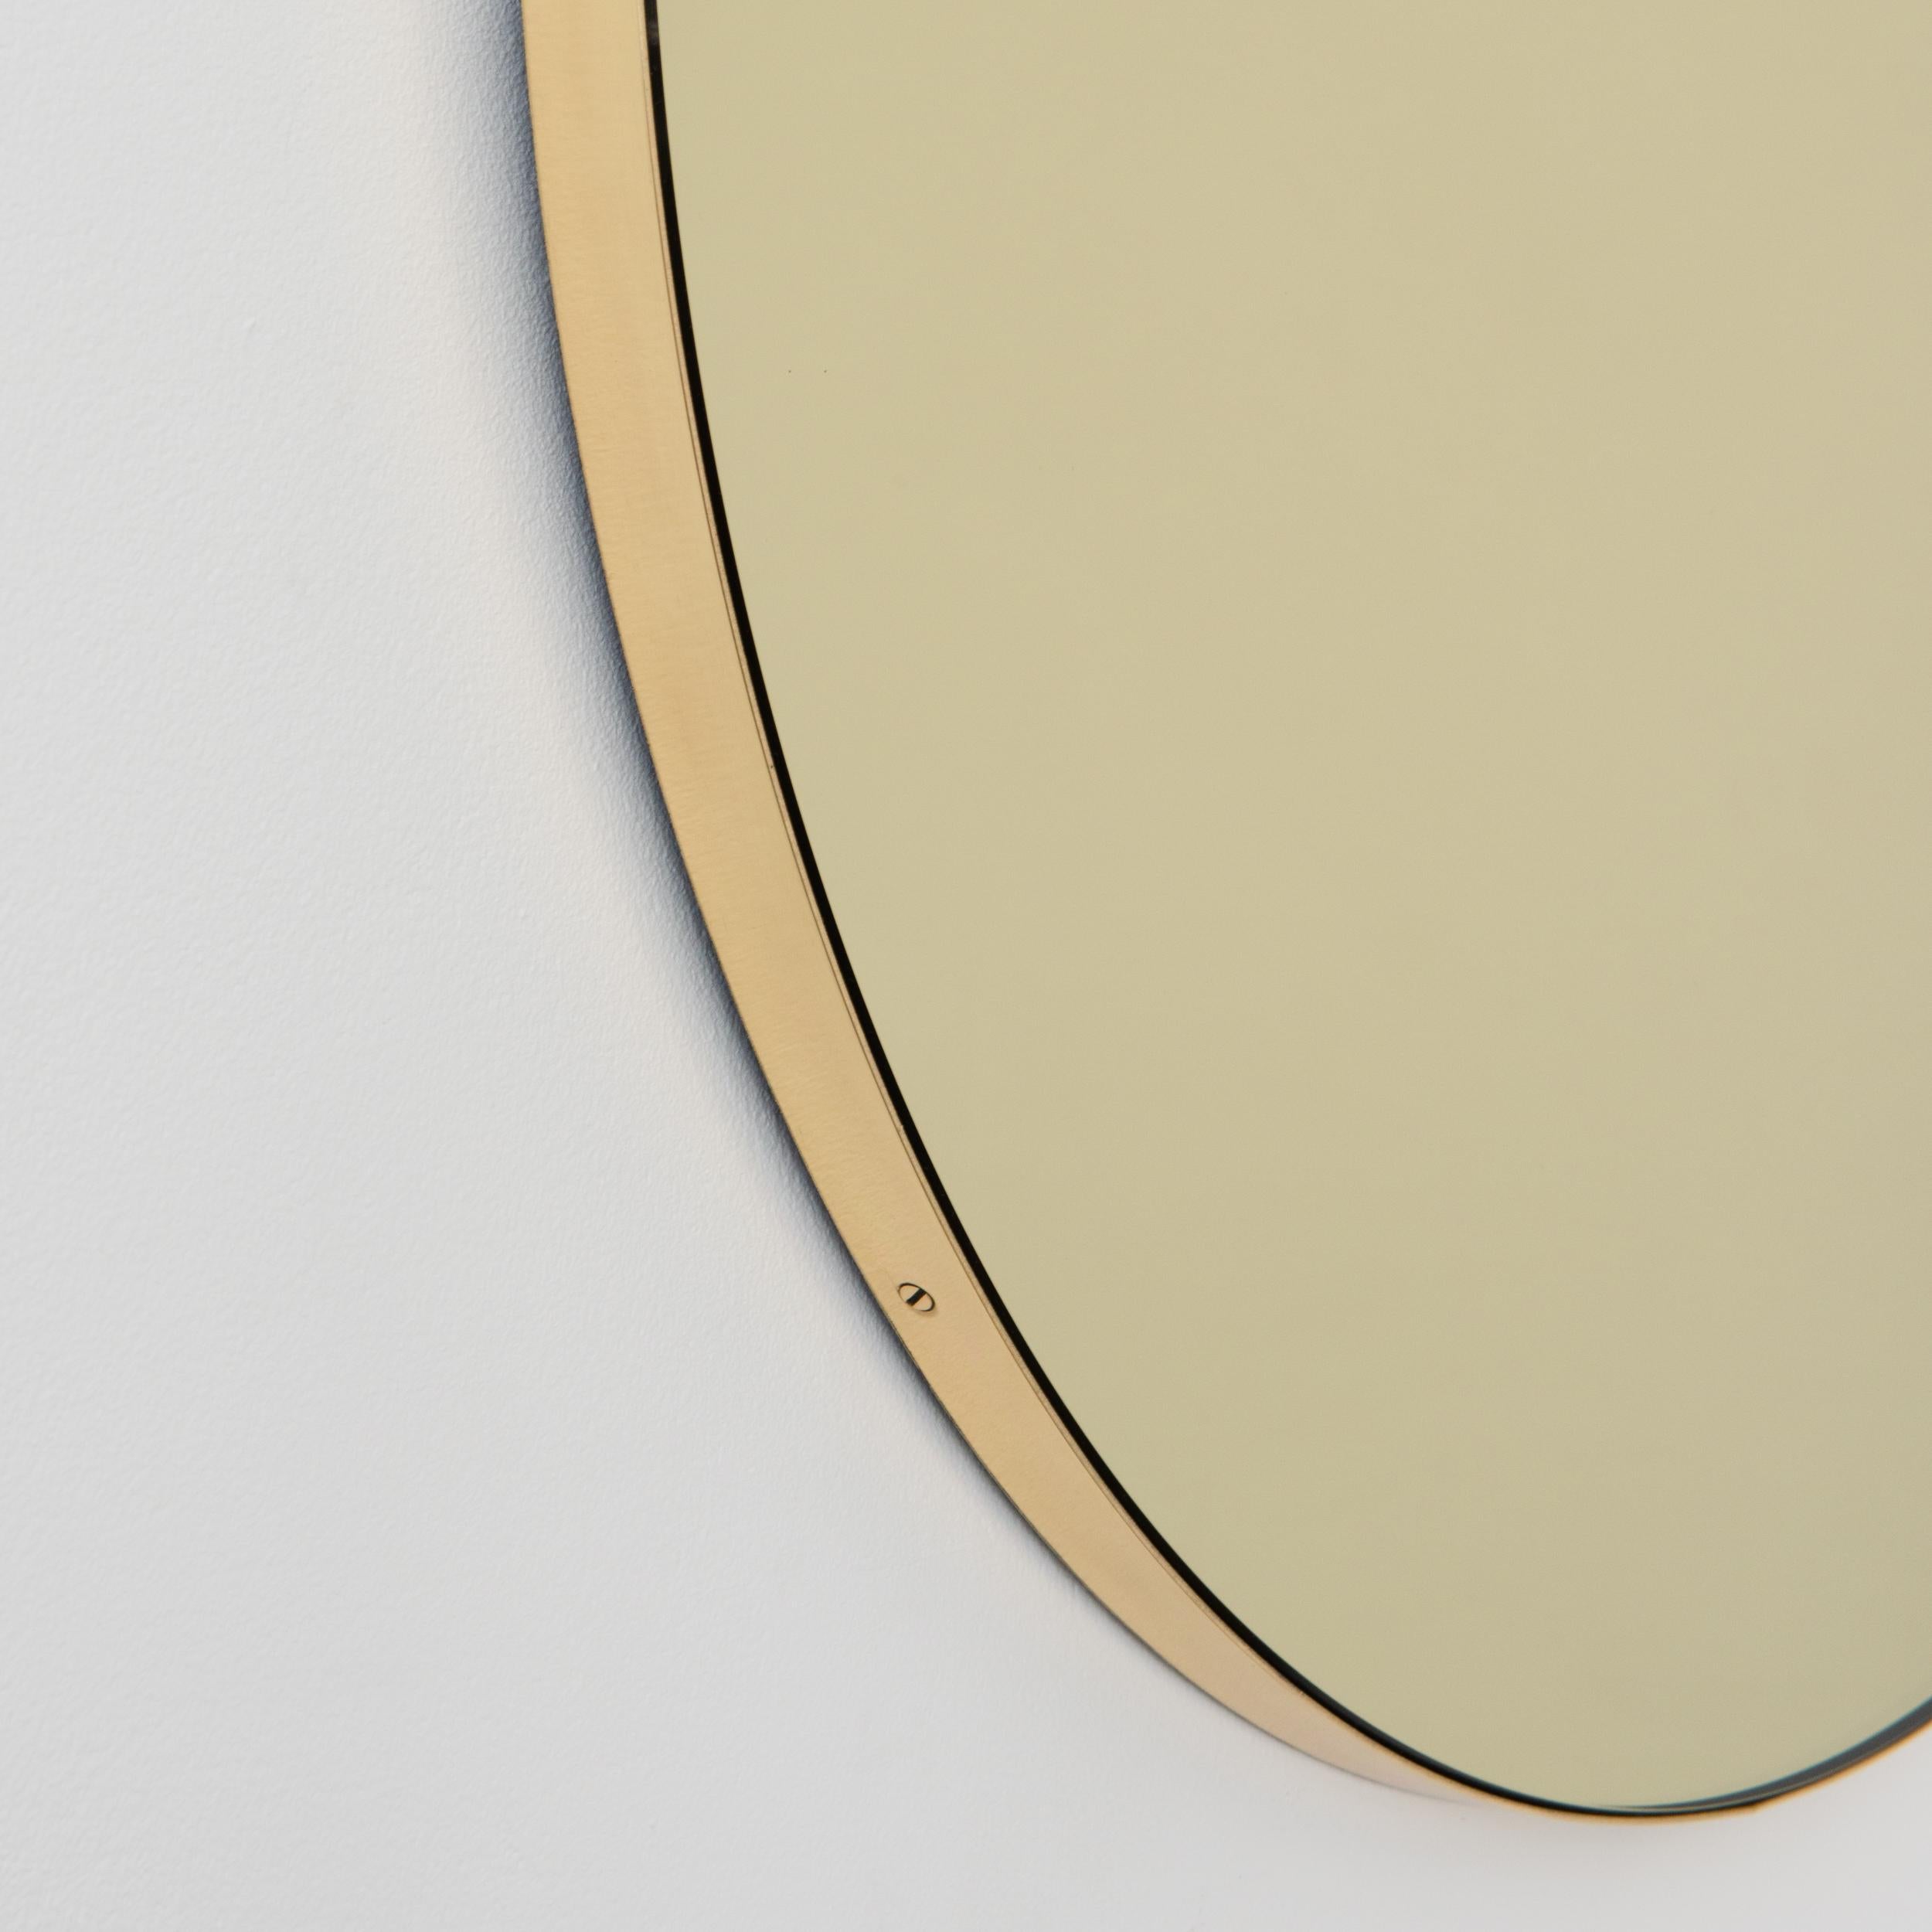 Contemporary gold tinted Orbis™ round mirror with a minimalist solid brushed brass frame. The detailing and finish, including visible brass screws, emphasise the craft and quality feel of the mirror, a true signature of our brand.  Designed and